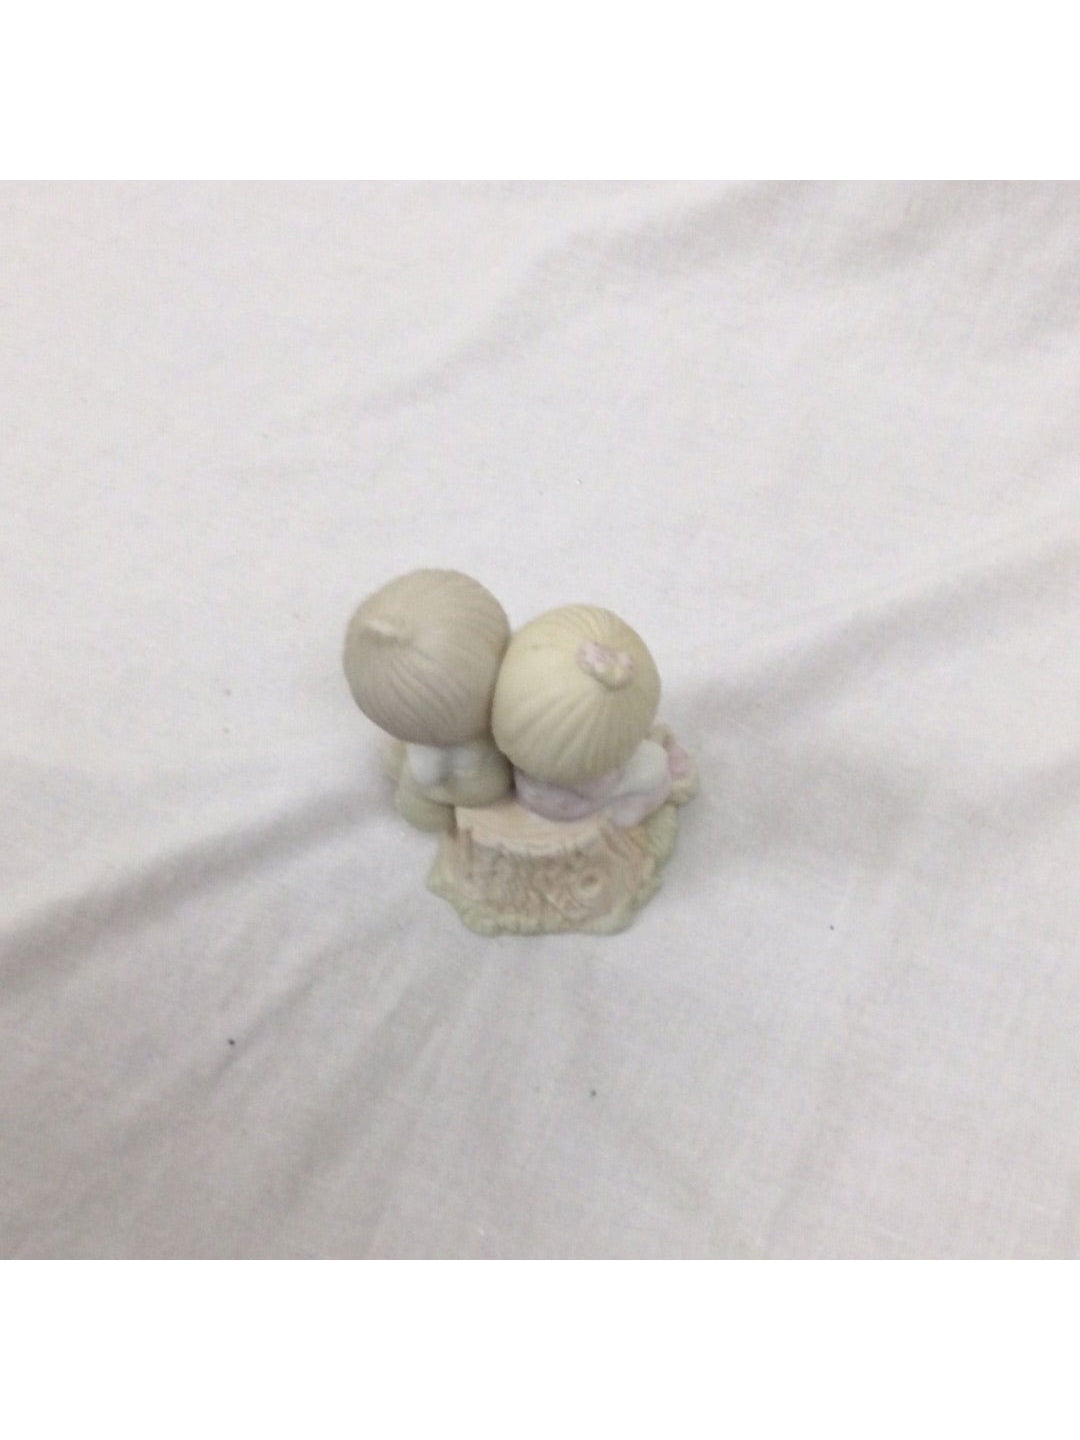 Jonathan & David Twin Baby Figurine - The Kennedy Collective Thrift - 